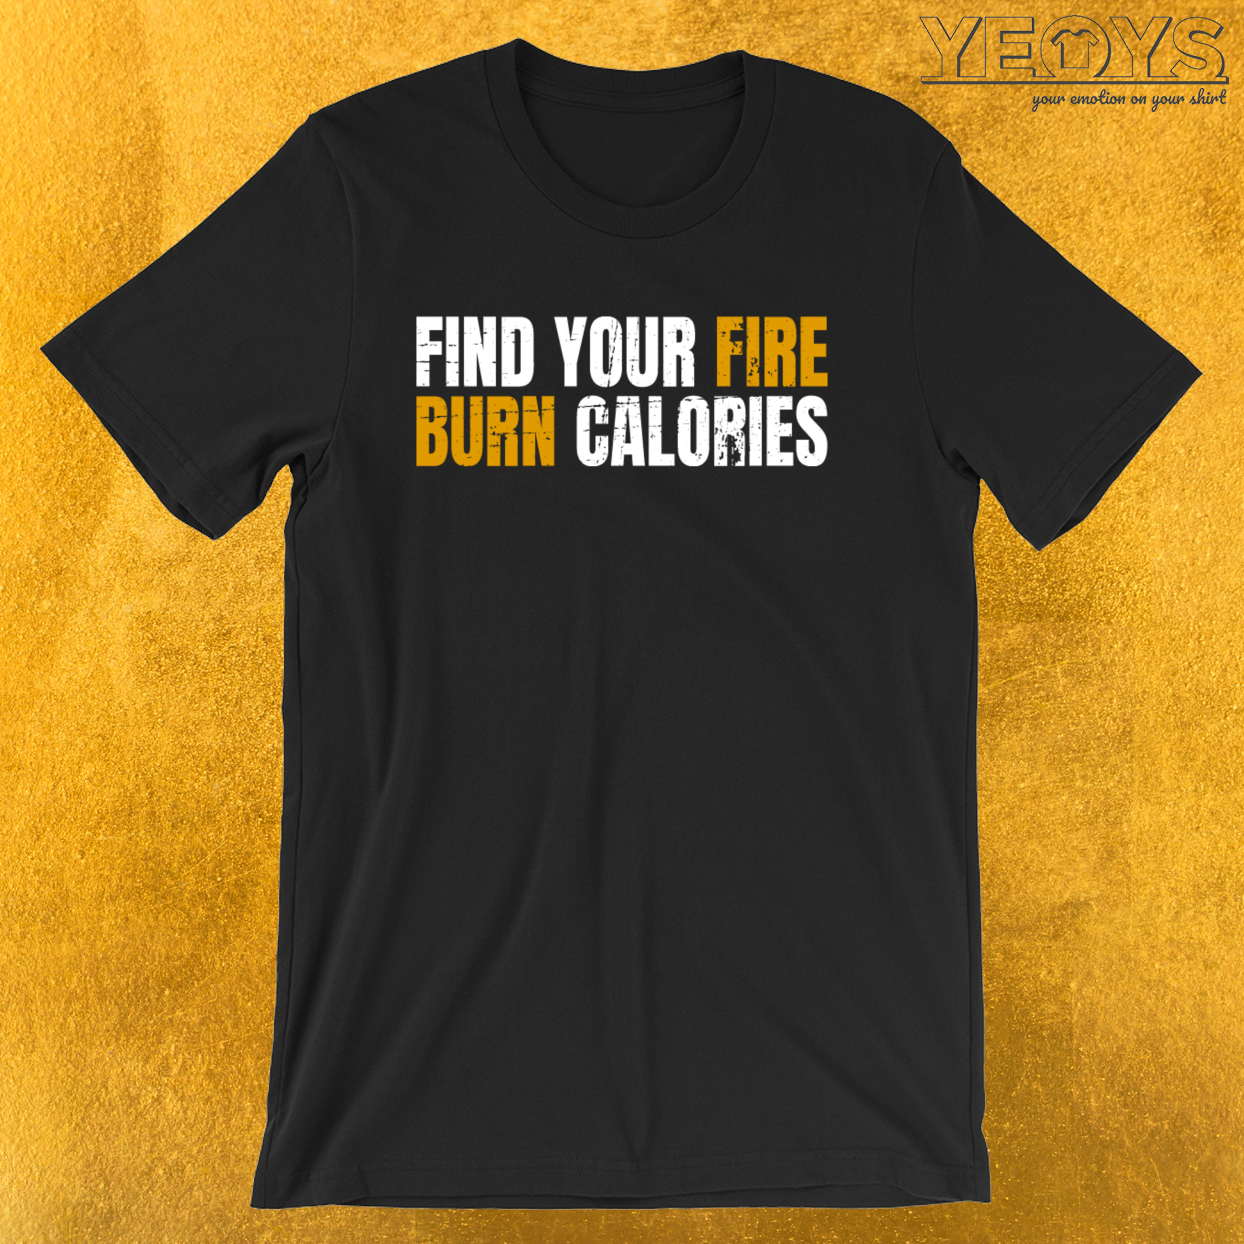 Find Your Fire And Burn Calories – Calorie Burning Tee